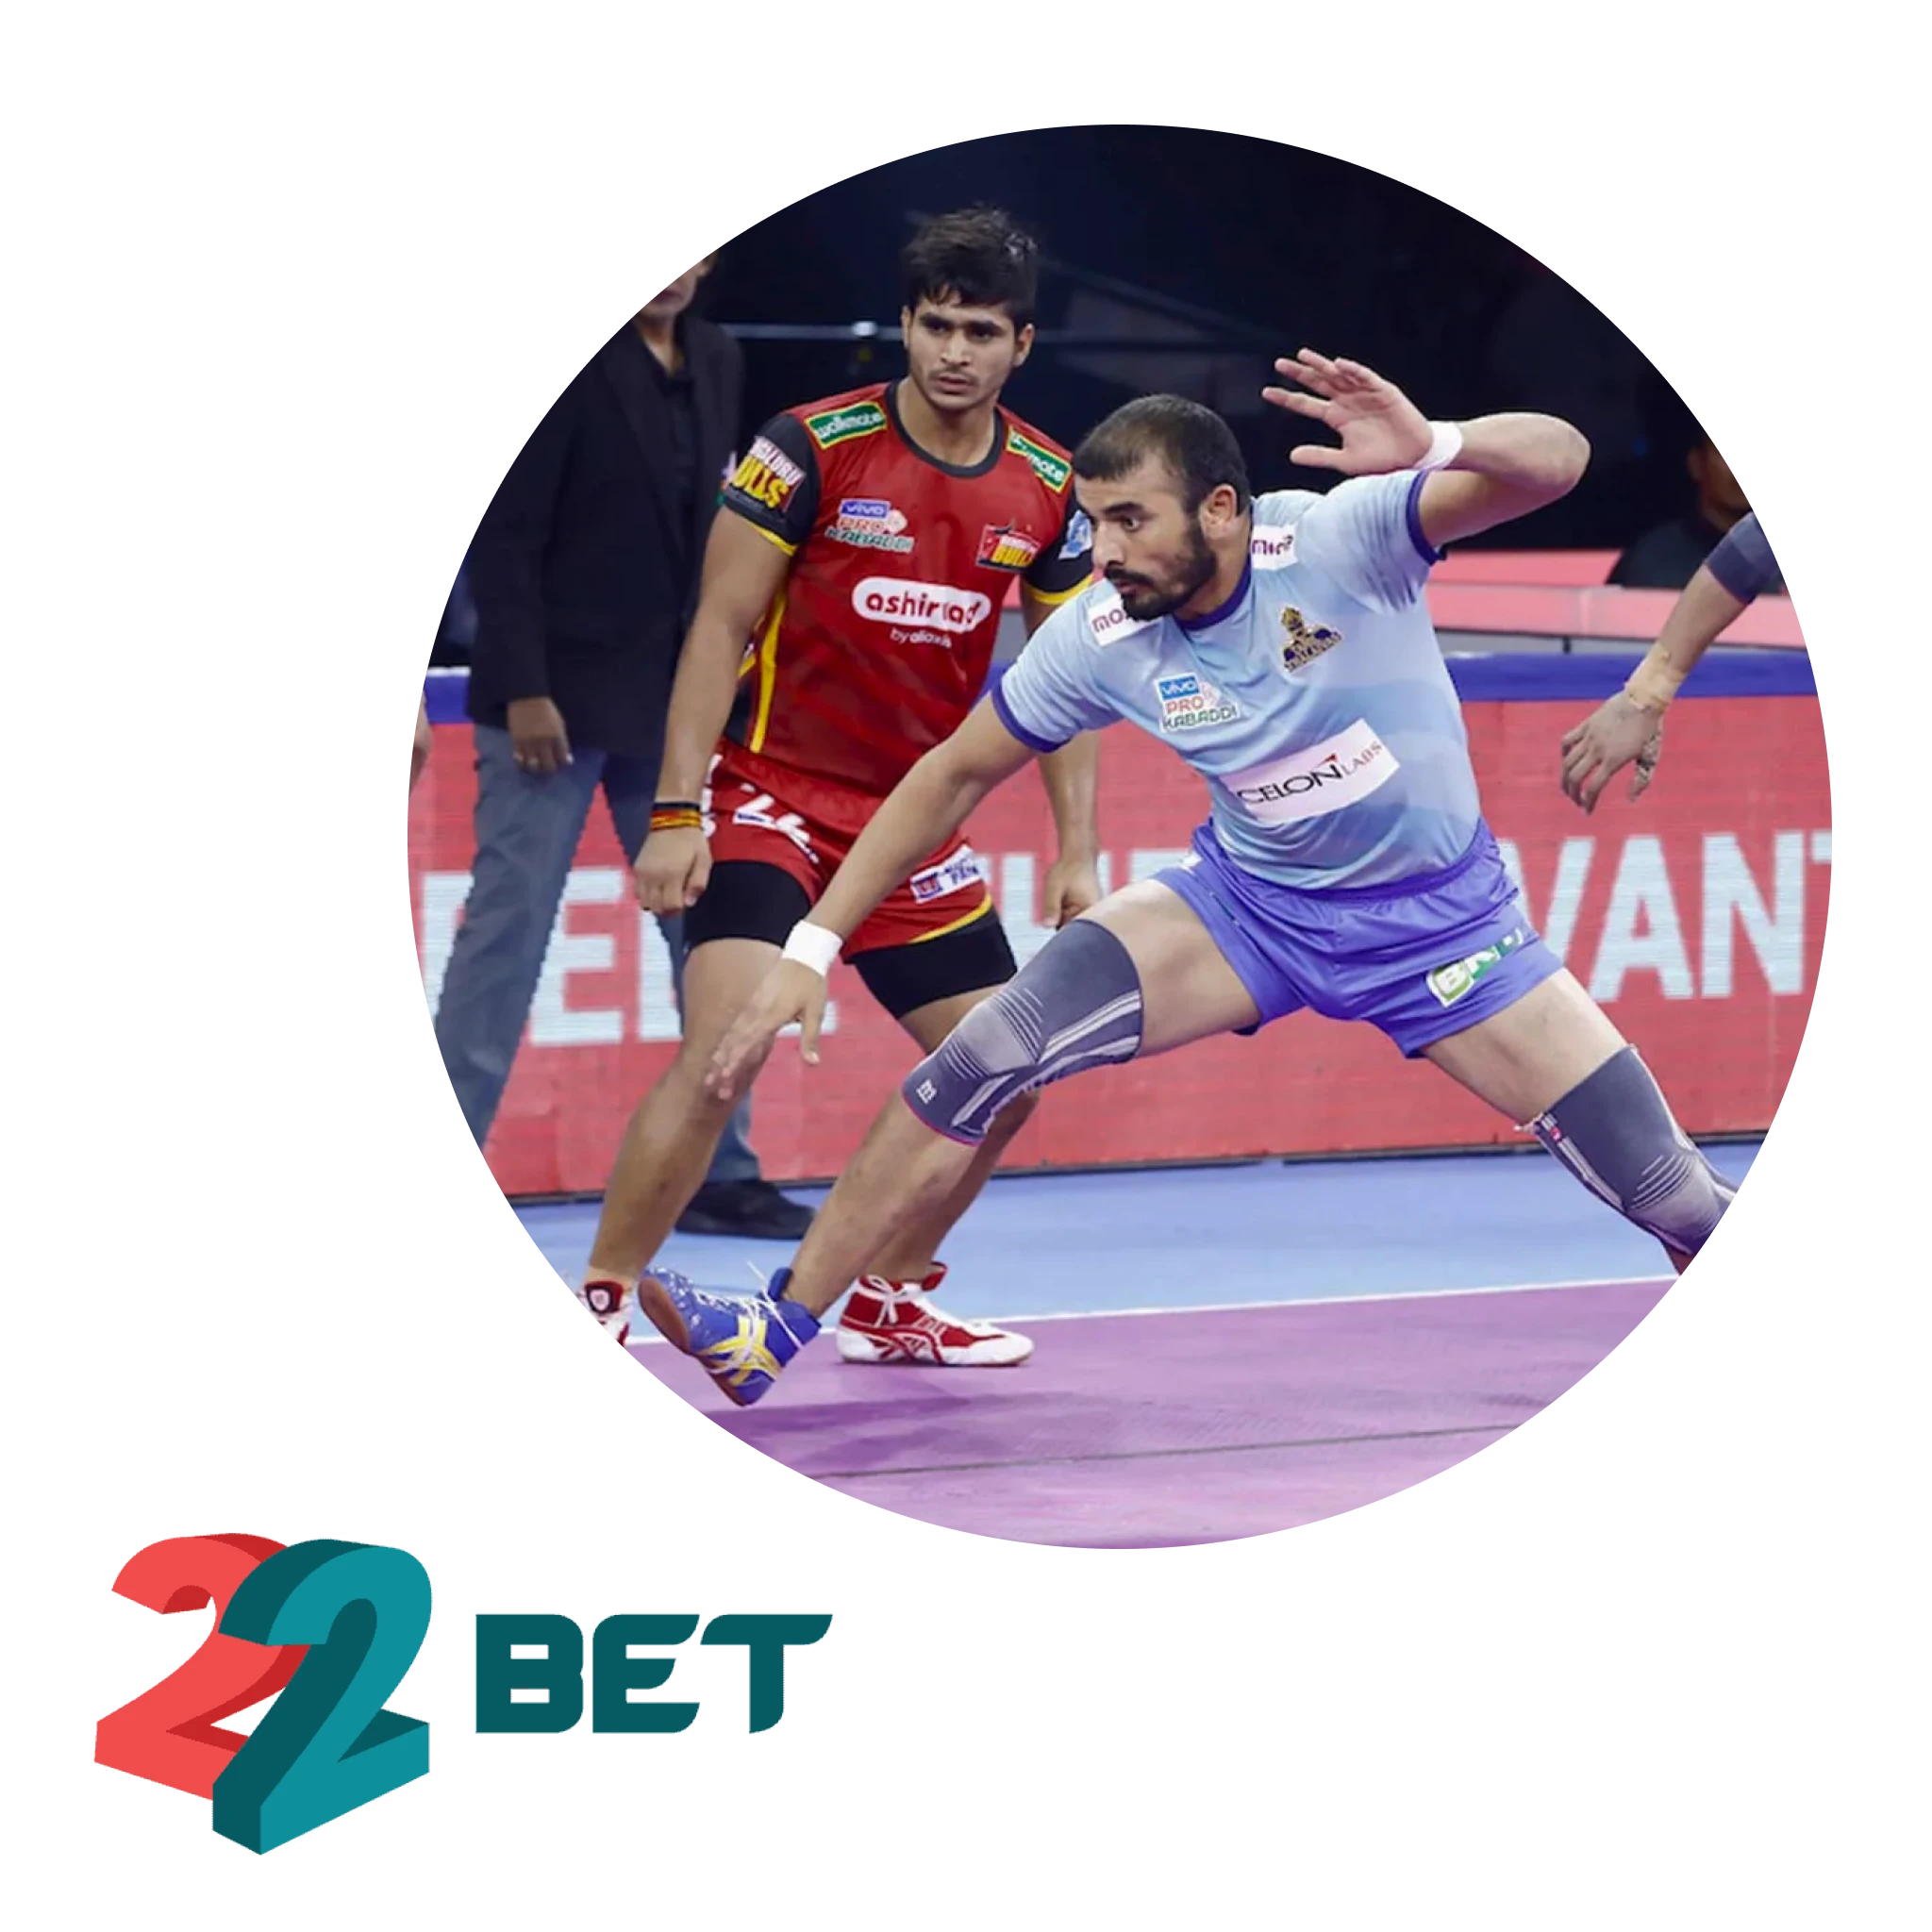 22bet supports kabaddi live betting, where players can place bets in real match time.